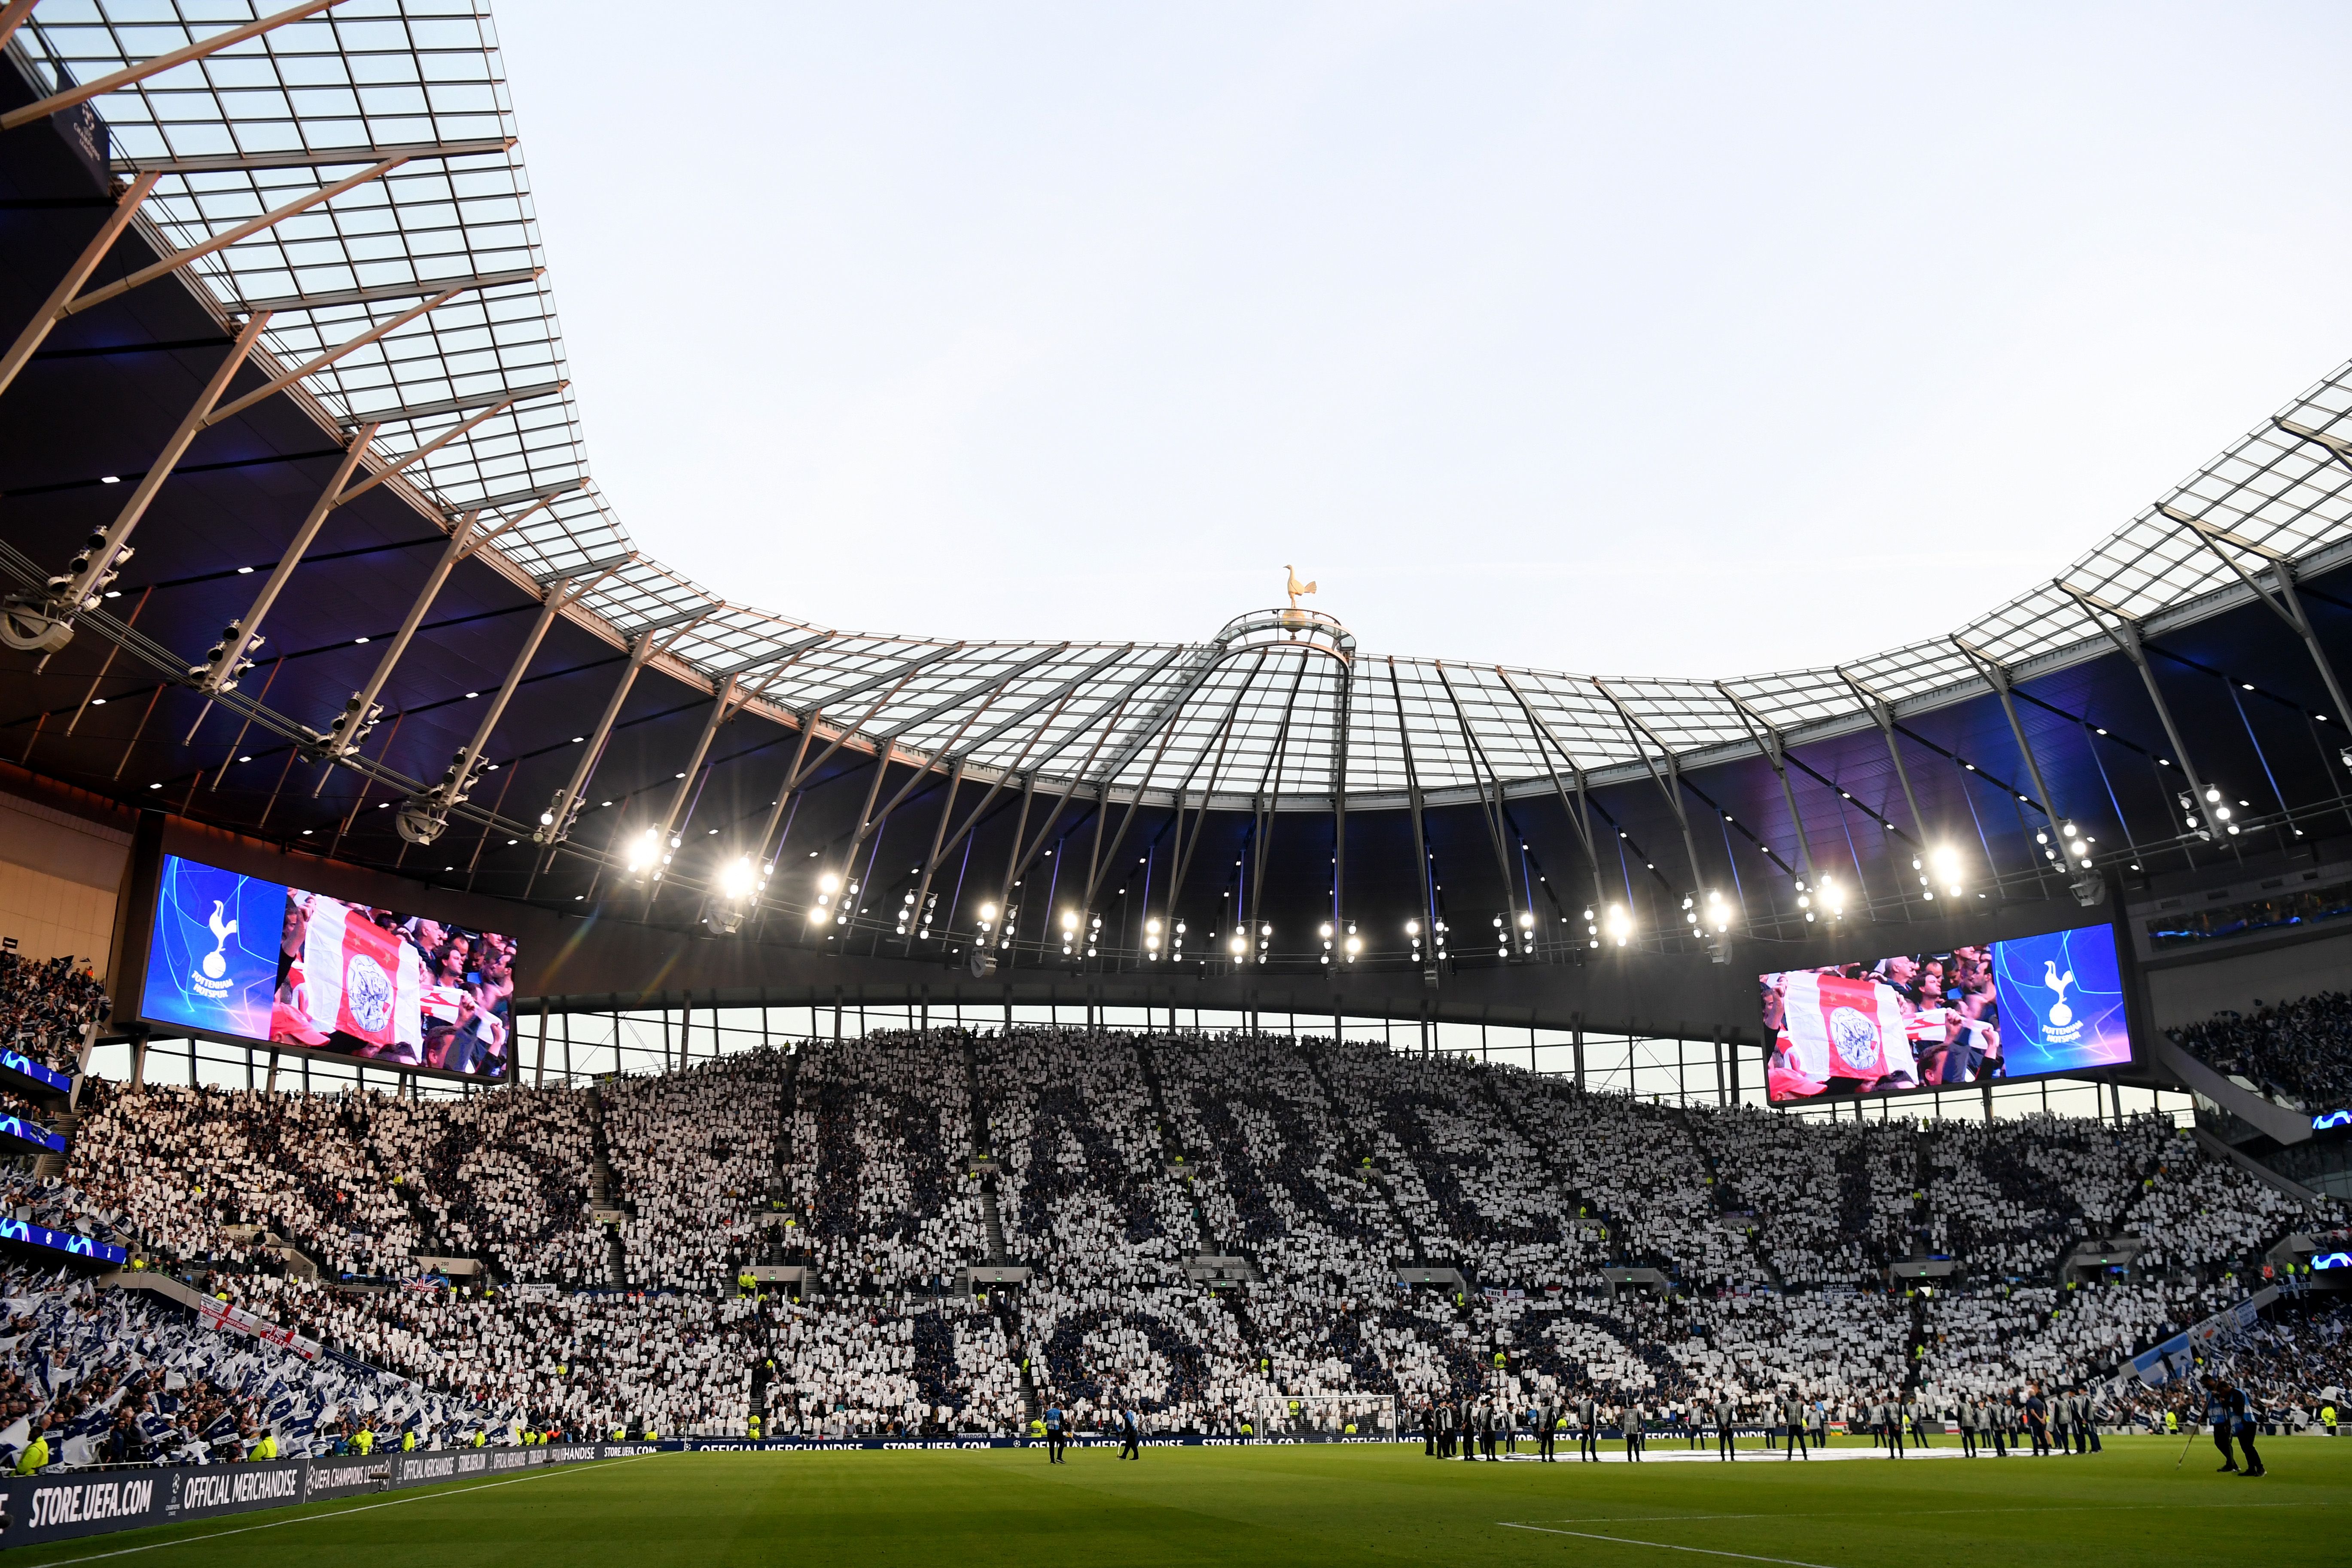 General view of the Tottenham Hotspur Stadium on a Champions League night